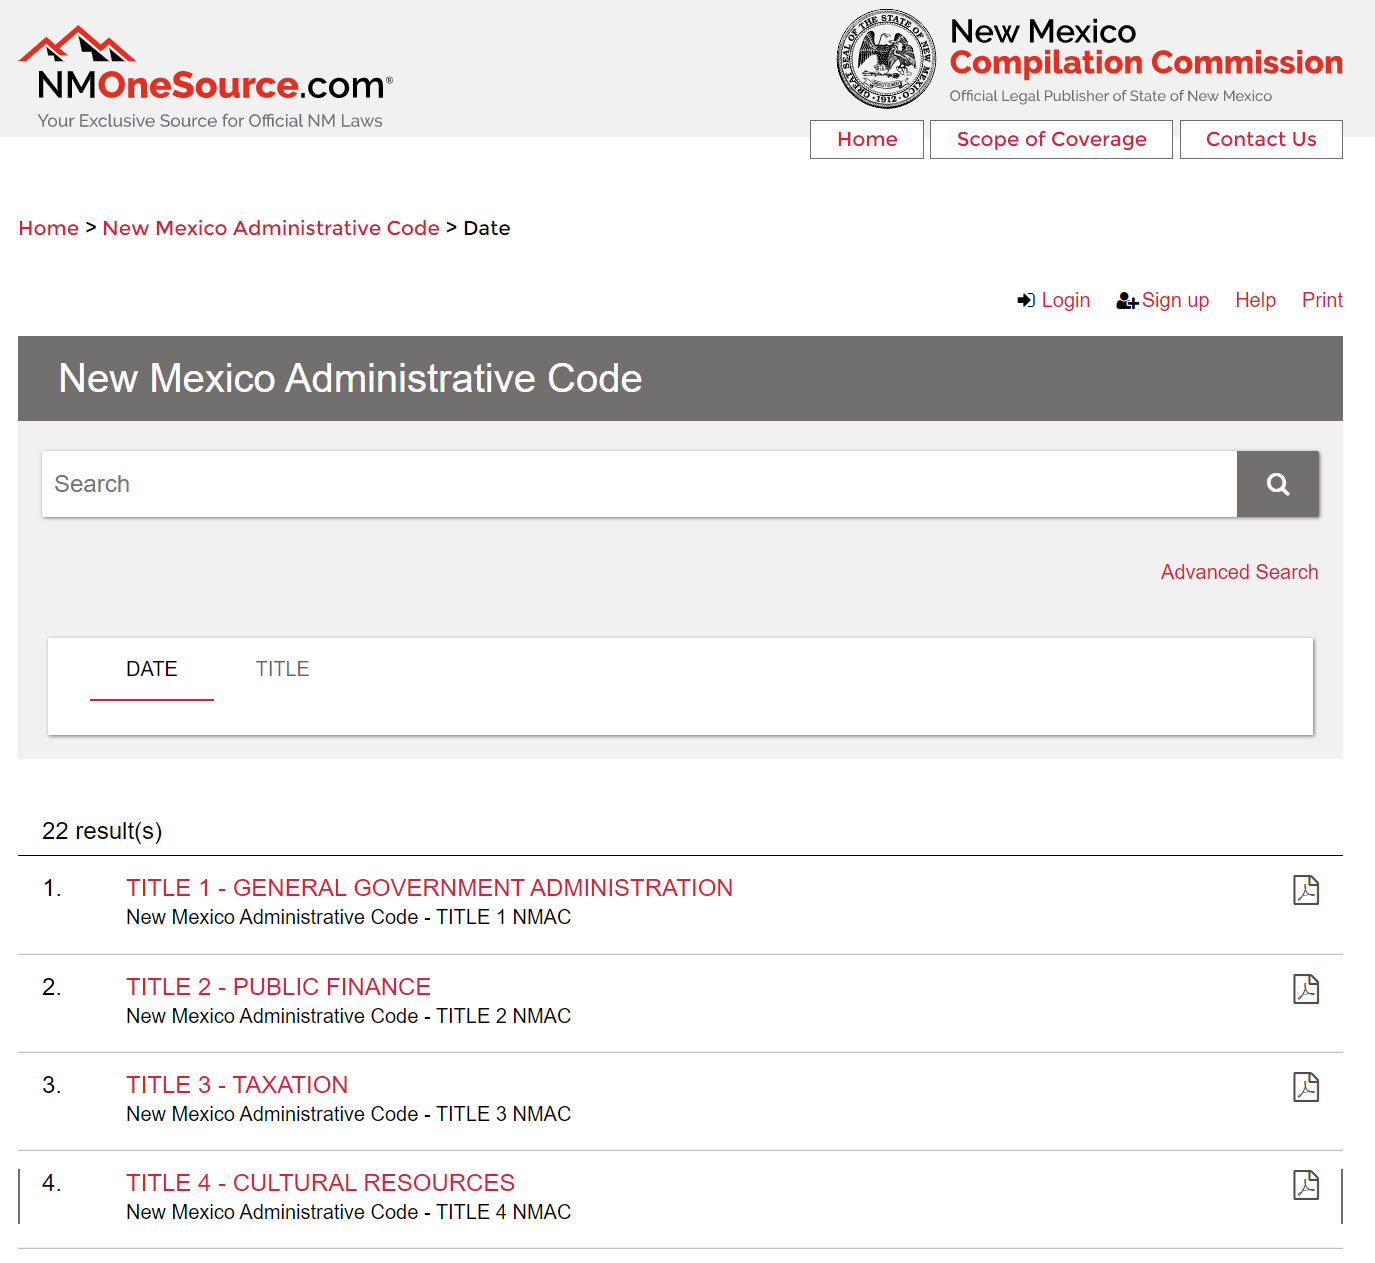 New Mexico Administrative Code Now Available on NMOneSource Lexum